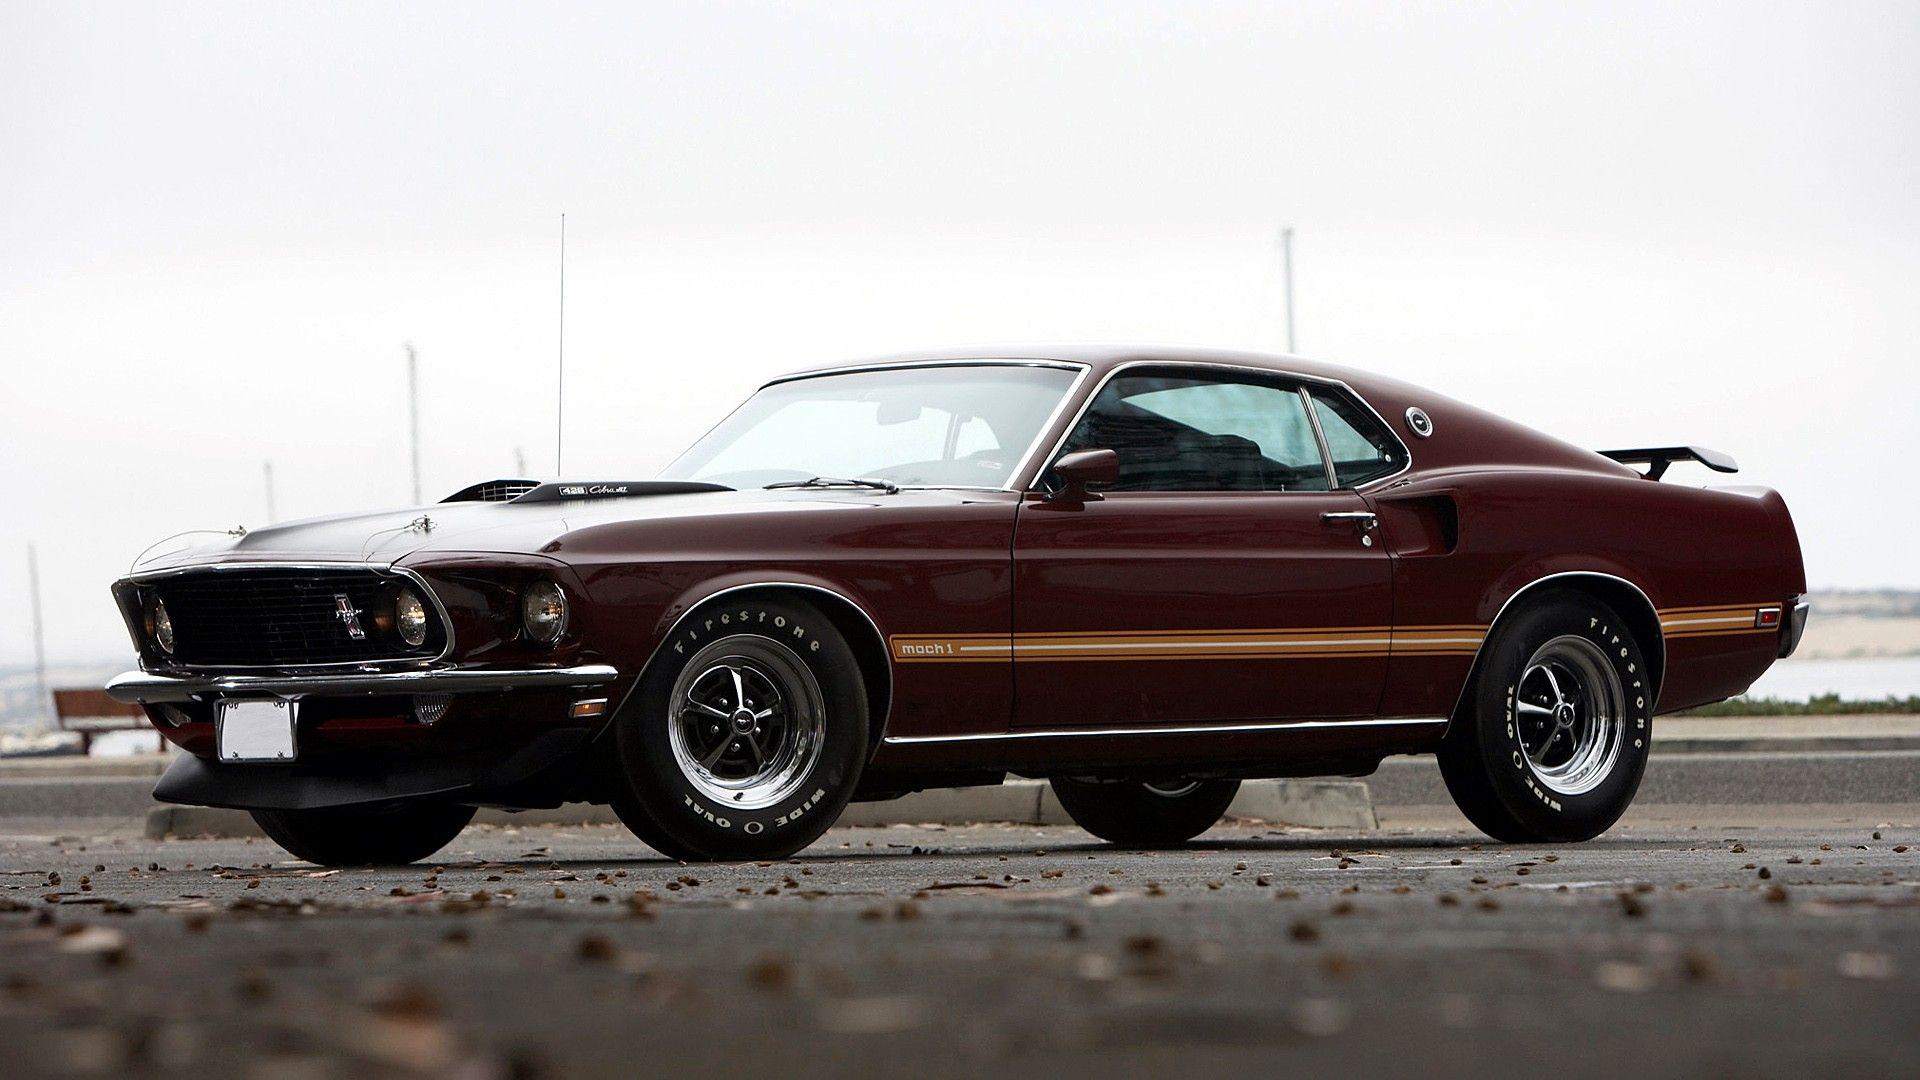 Classic Ford Muscle Car Wallpapers - Top Free Classic Ford Muscle Car